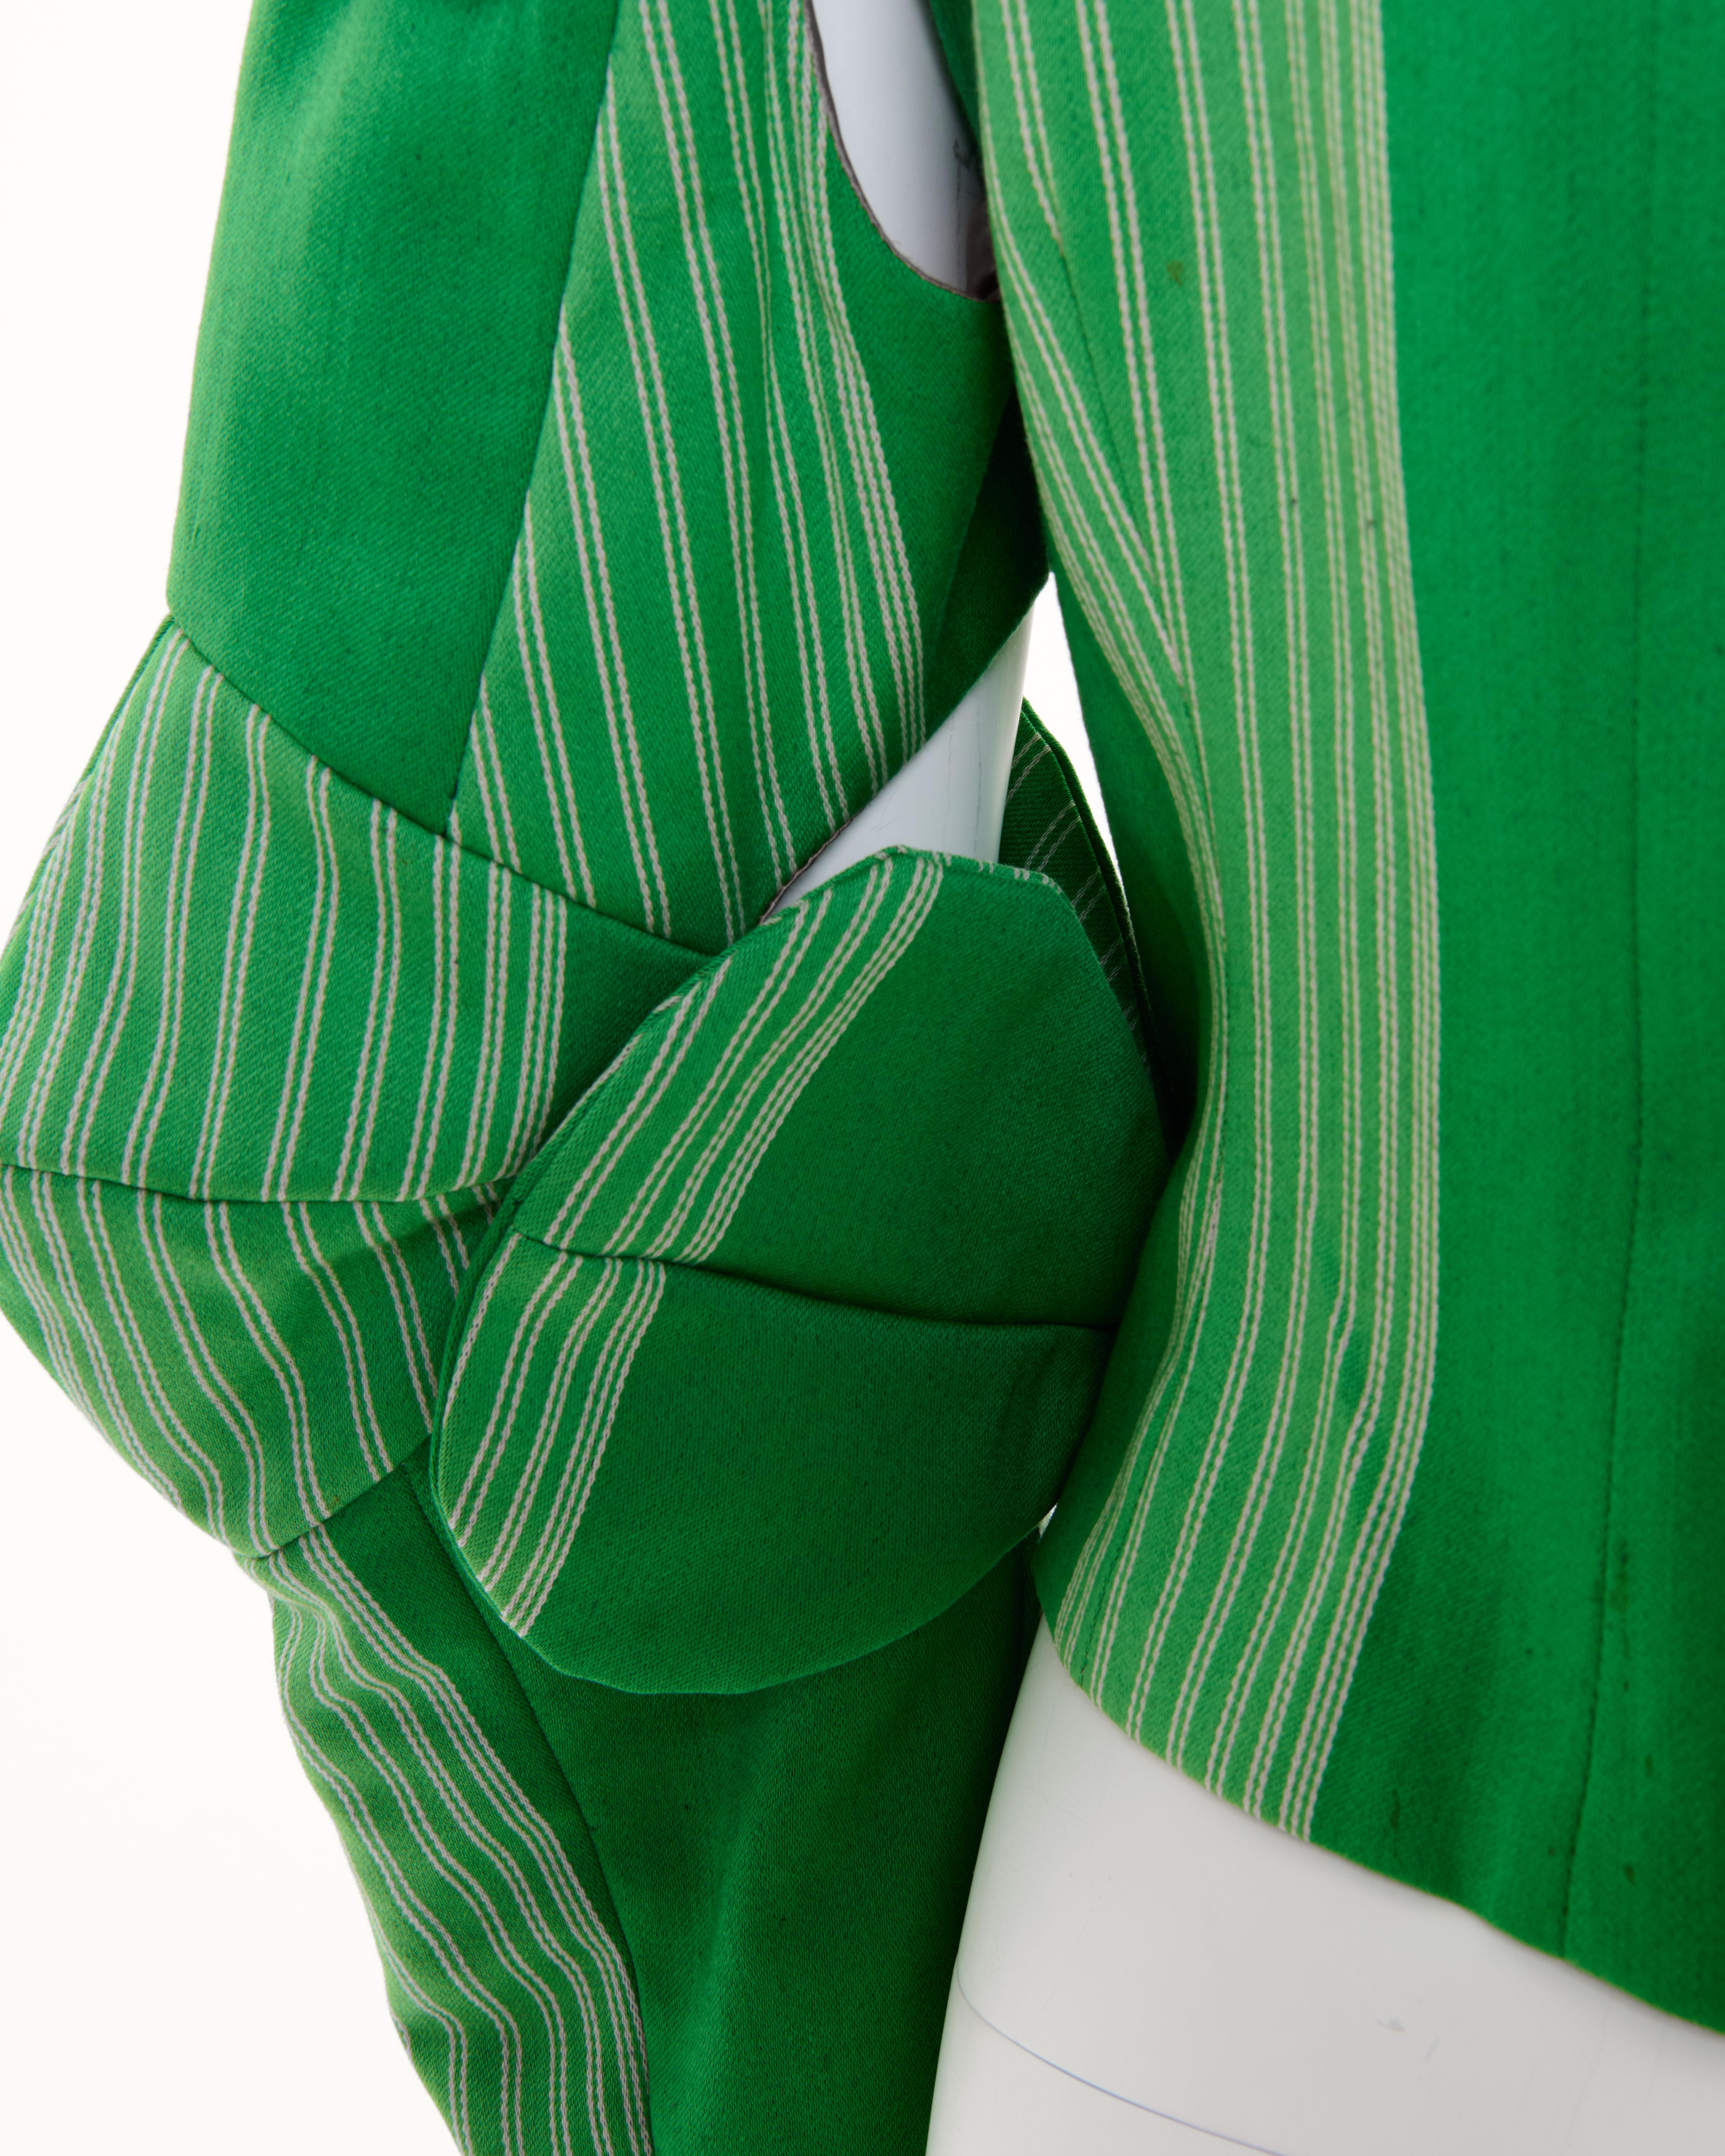 Vivienne Westwood  F/W 1988/89 ‘Time Machine’ Green striped Armour jacket For Sale 7